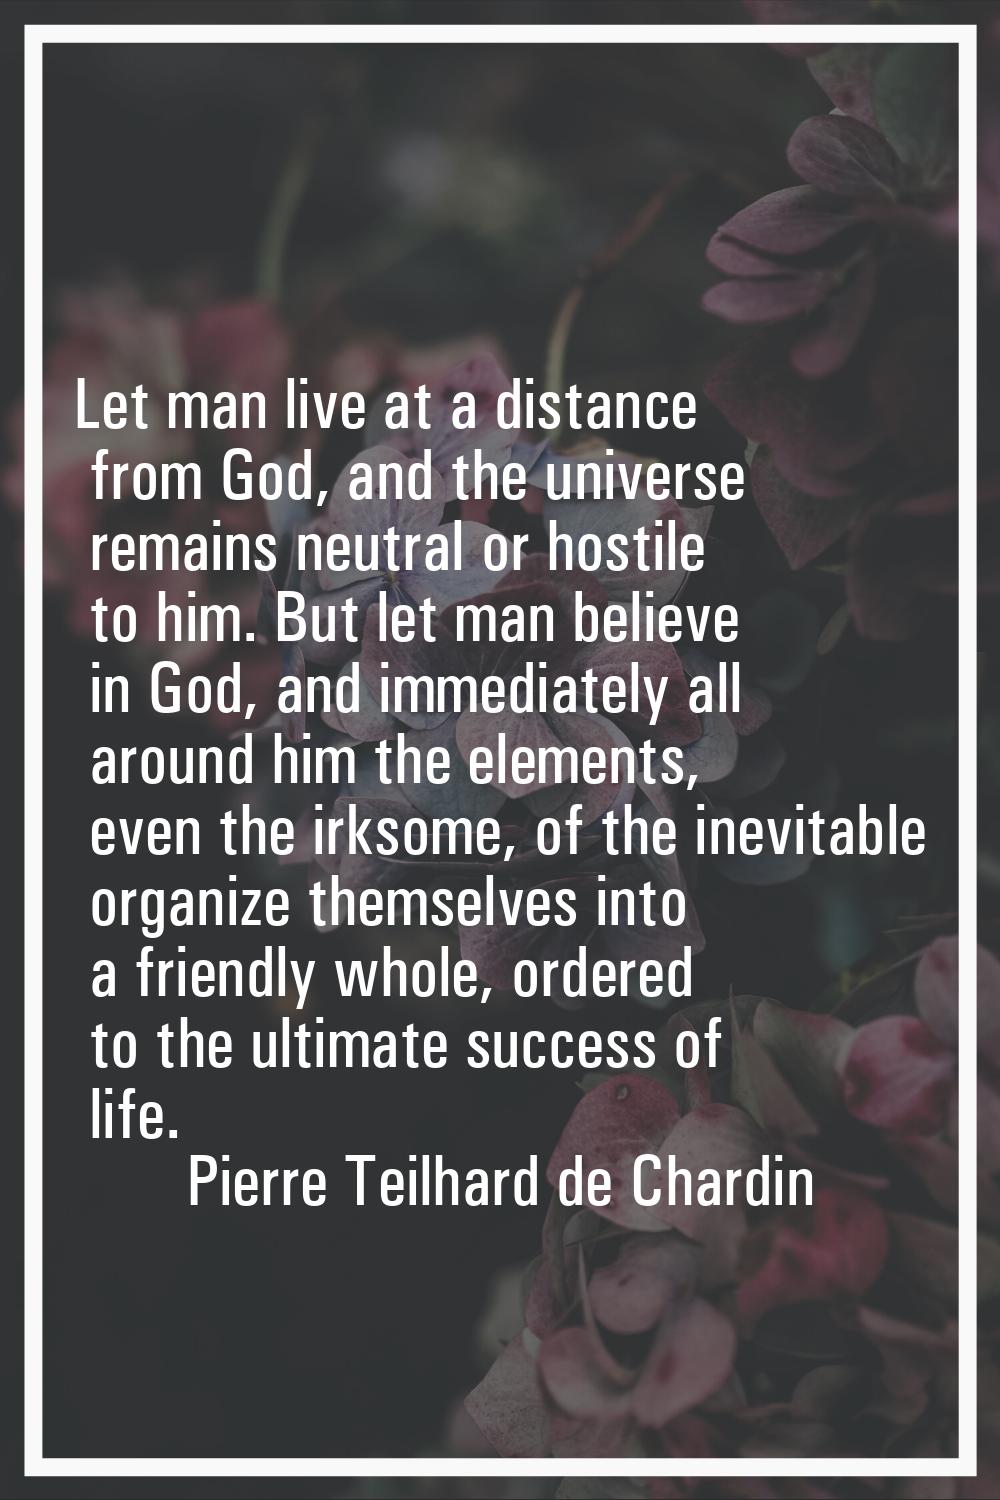 Let man live at a distance from God, and the universe remains neutral or hostile to him. But let ma